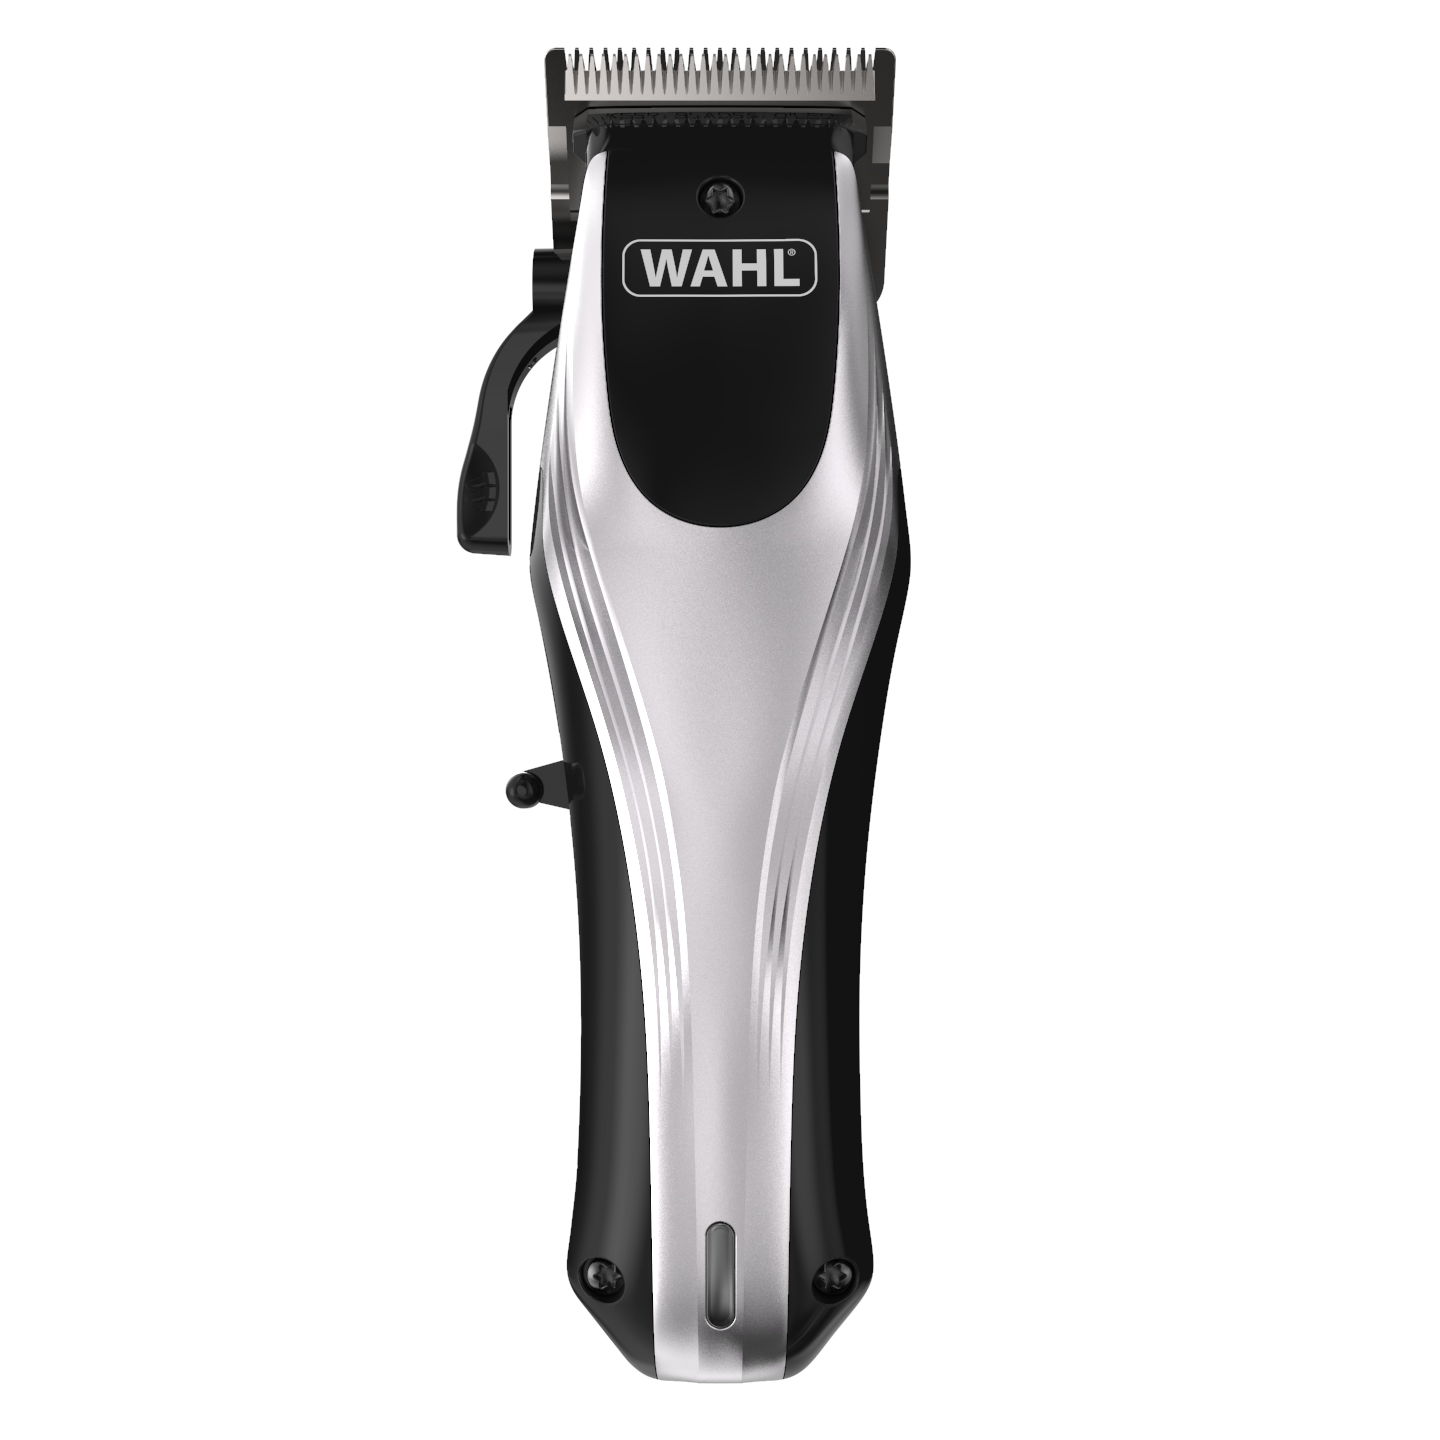 Wahl Rapid Clip Corded Cordless Hair Clipper | Hair Clippers